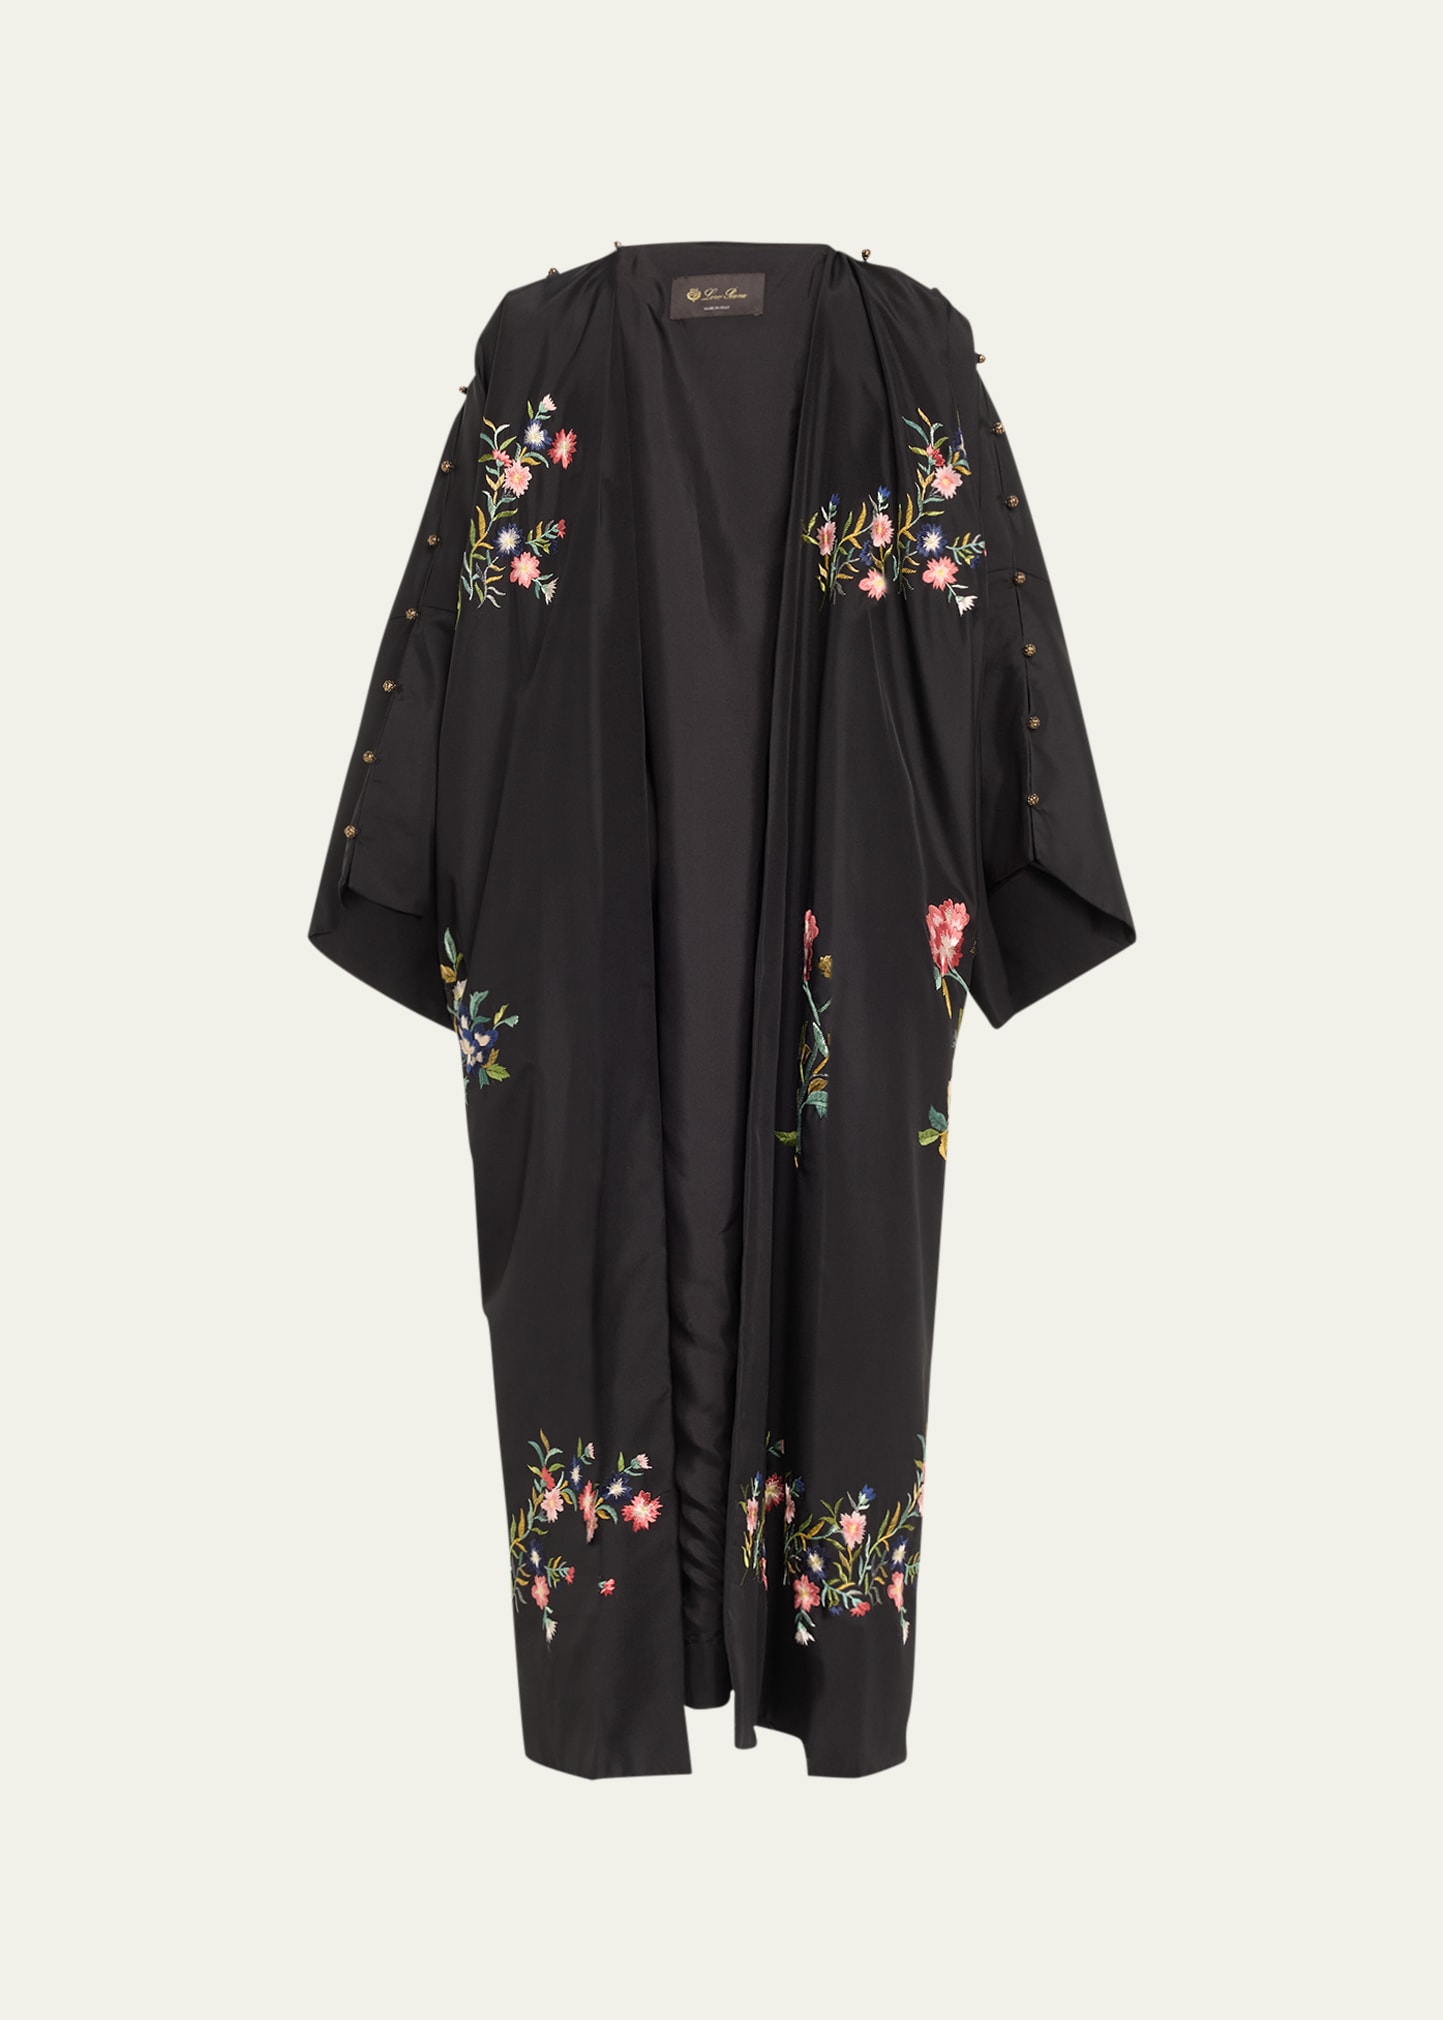 Loro Piana Capp Giulia Floral Embroidered Parachute Top Coat In F5iy Chinese Flow